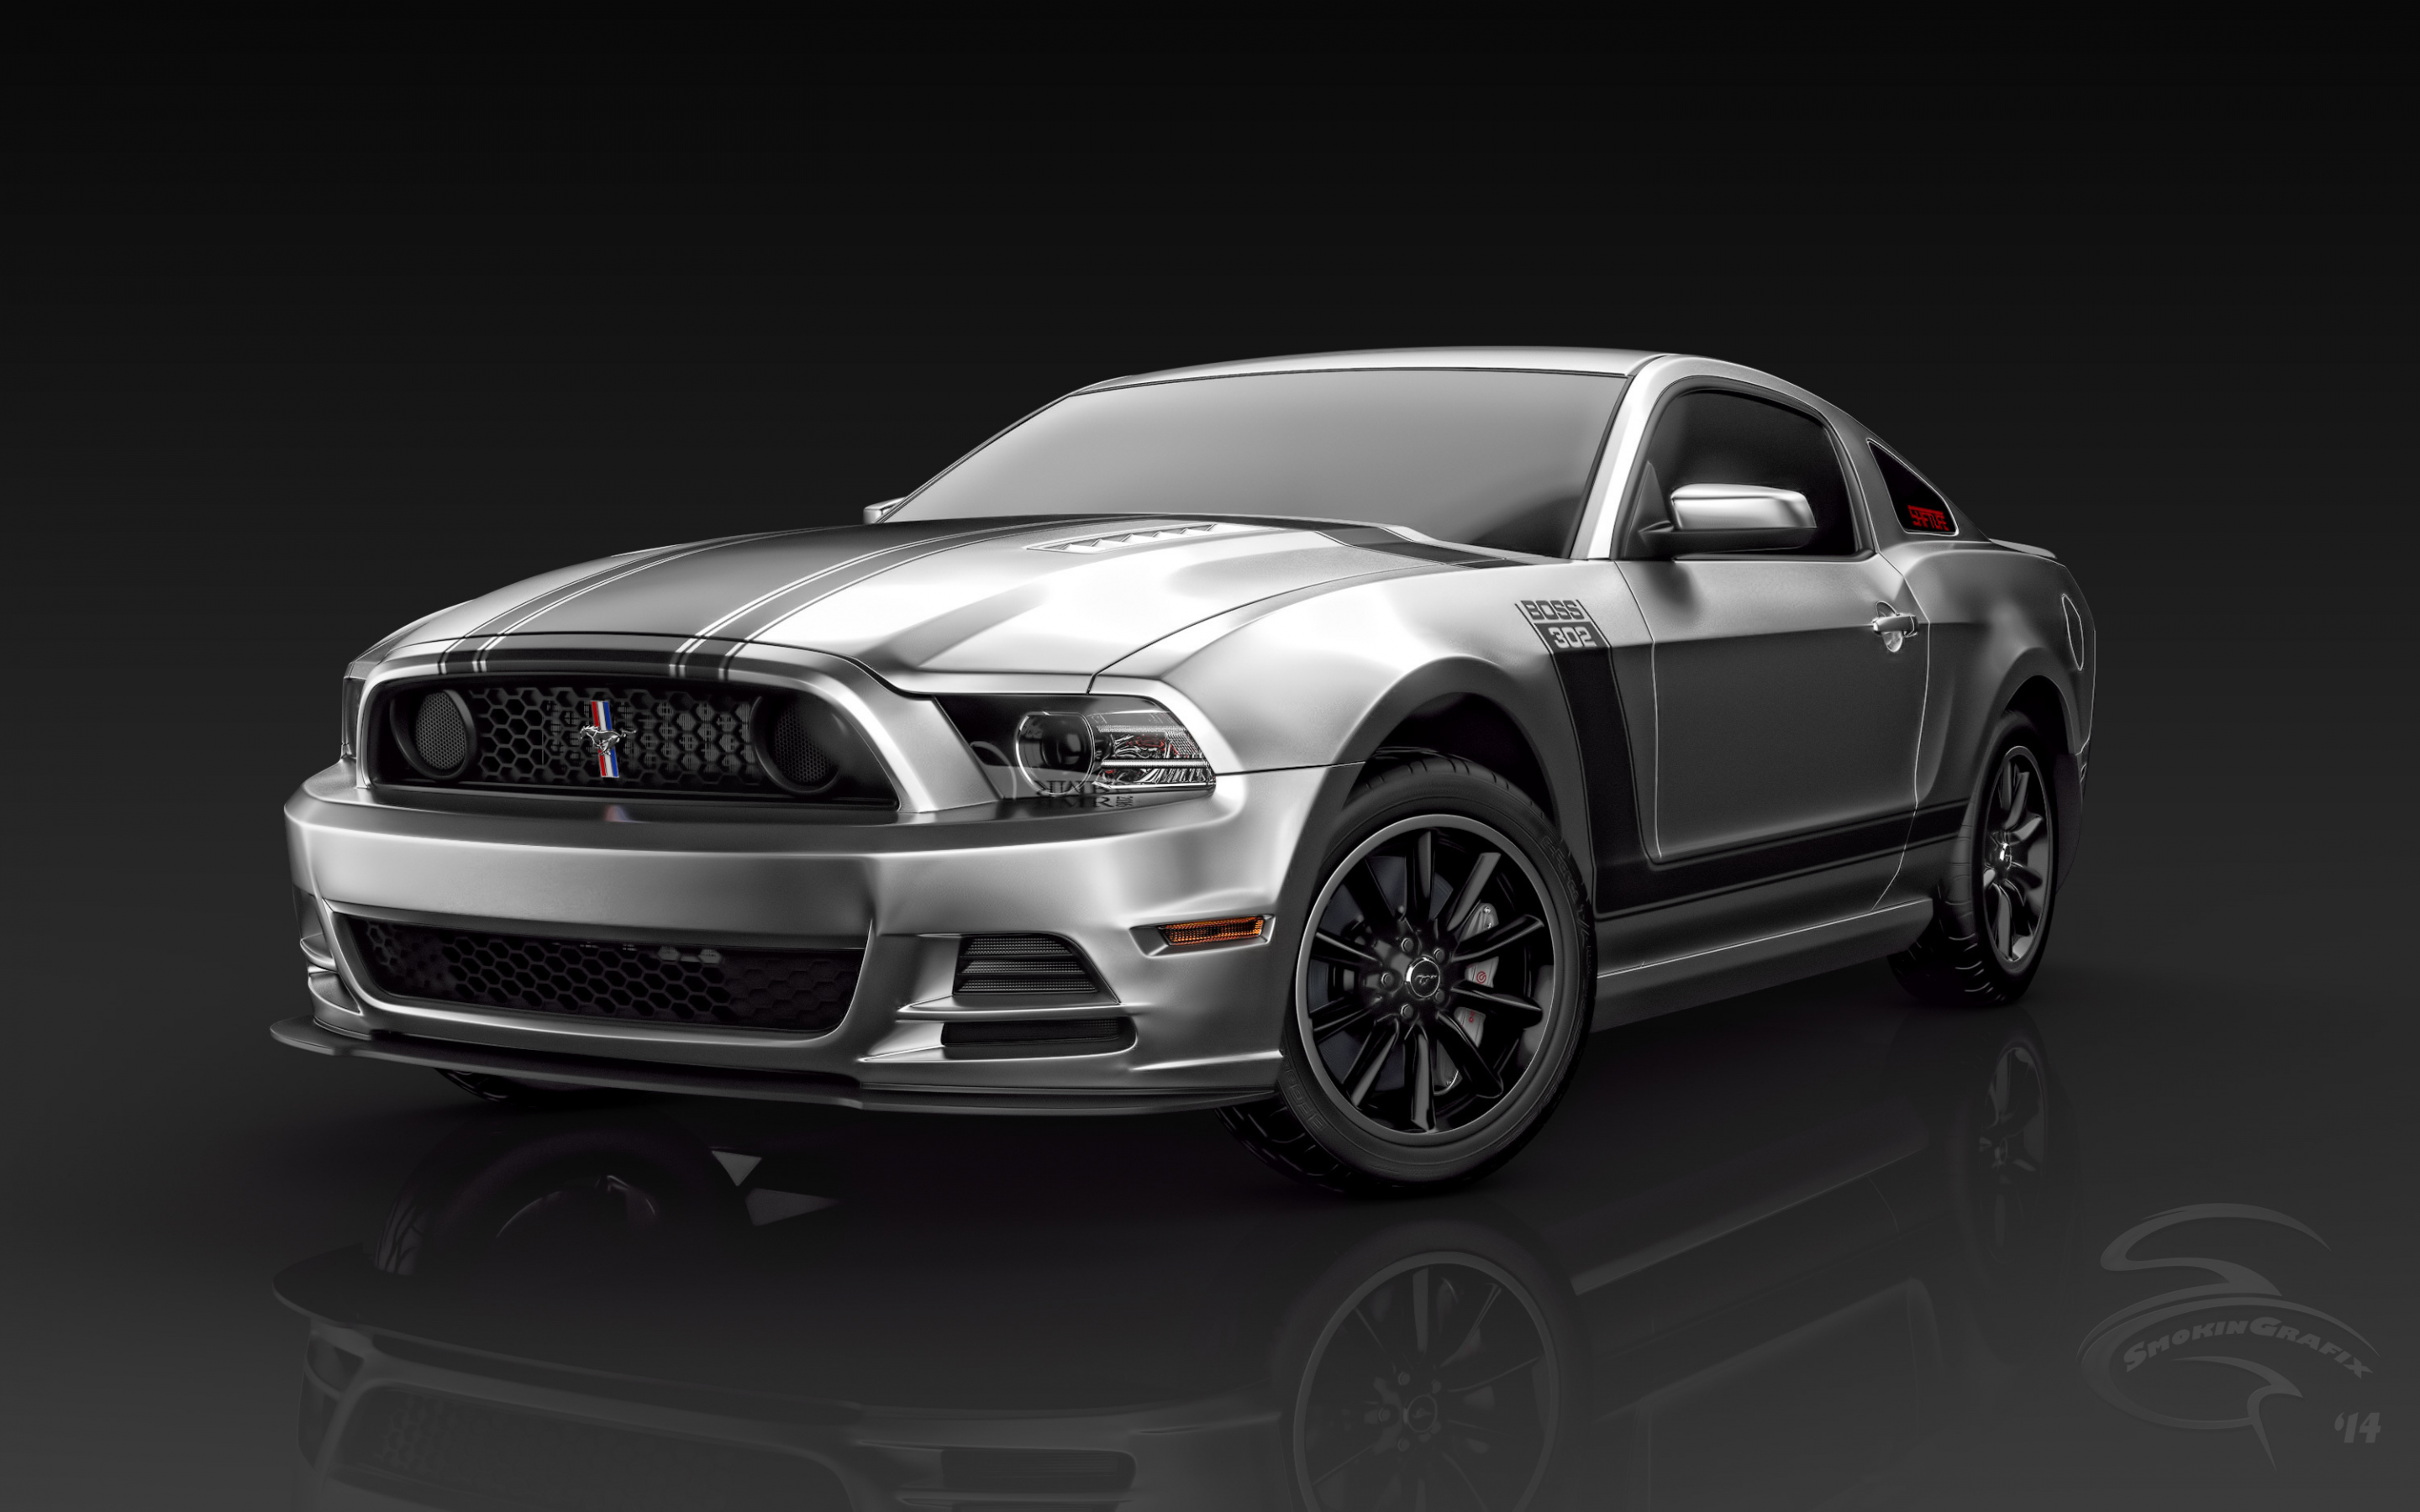 Silver, 2013 Ford Mustang Boss 302, front, 2880x1800 wallpaper